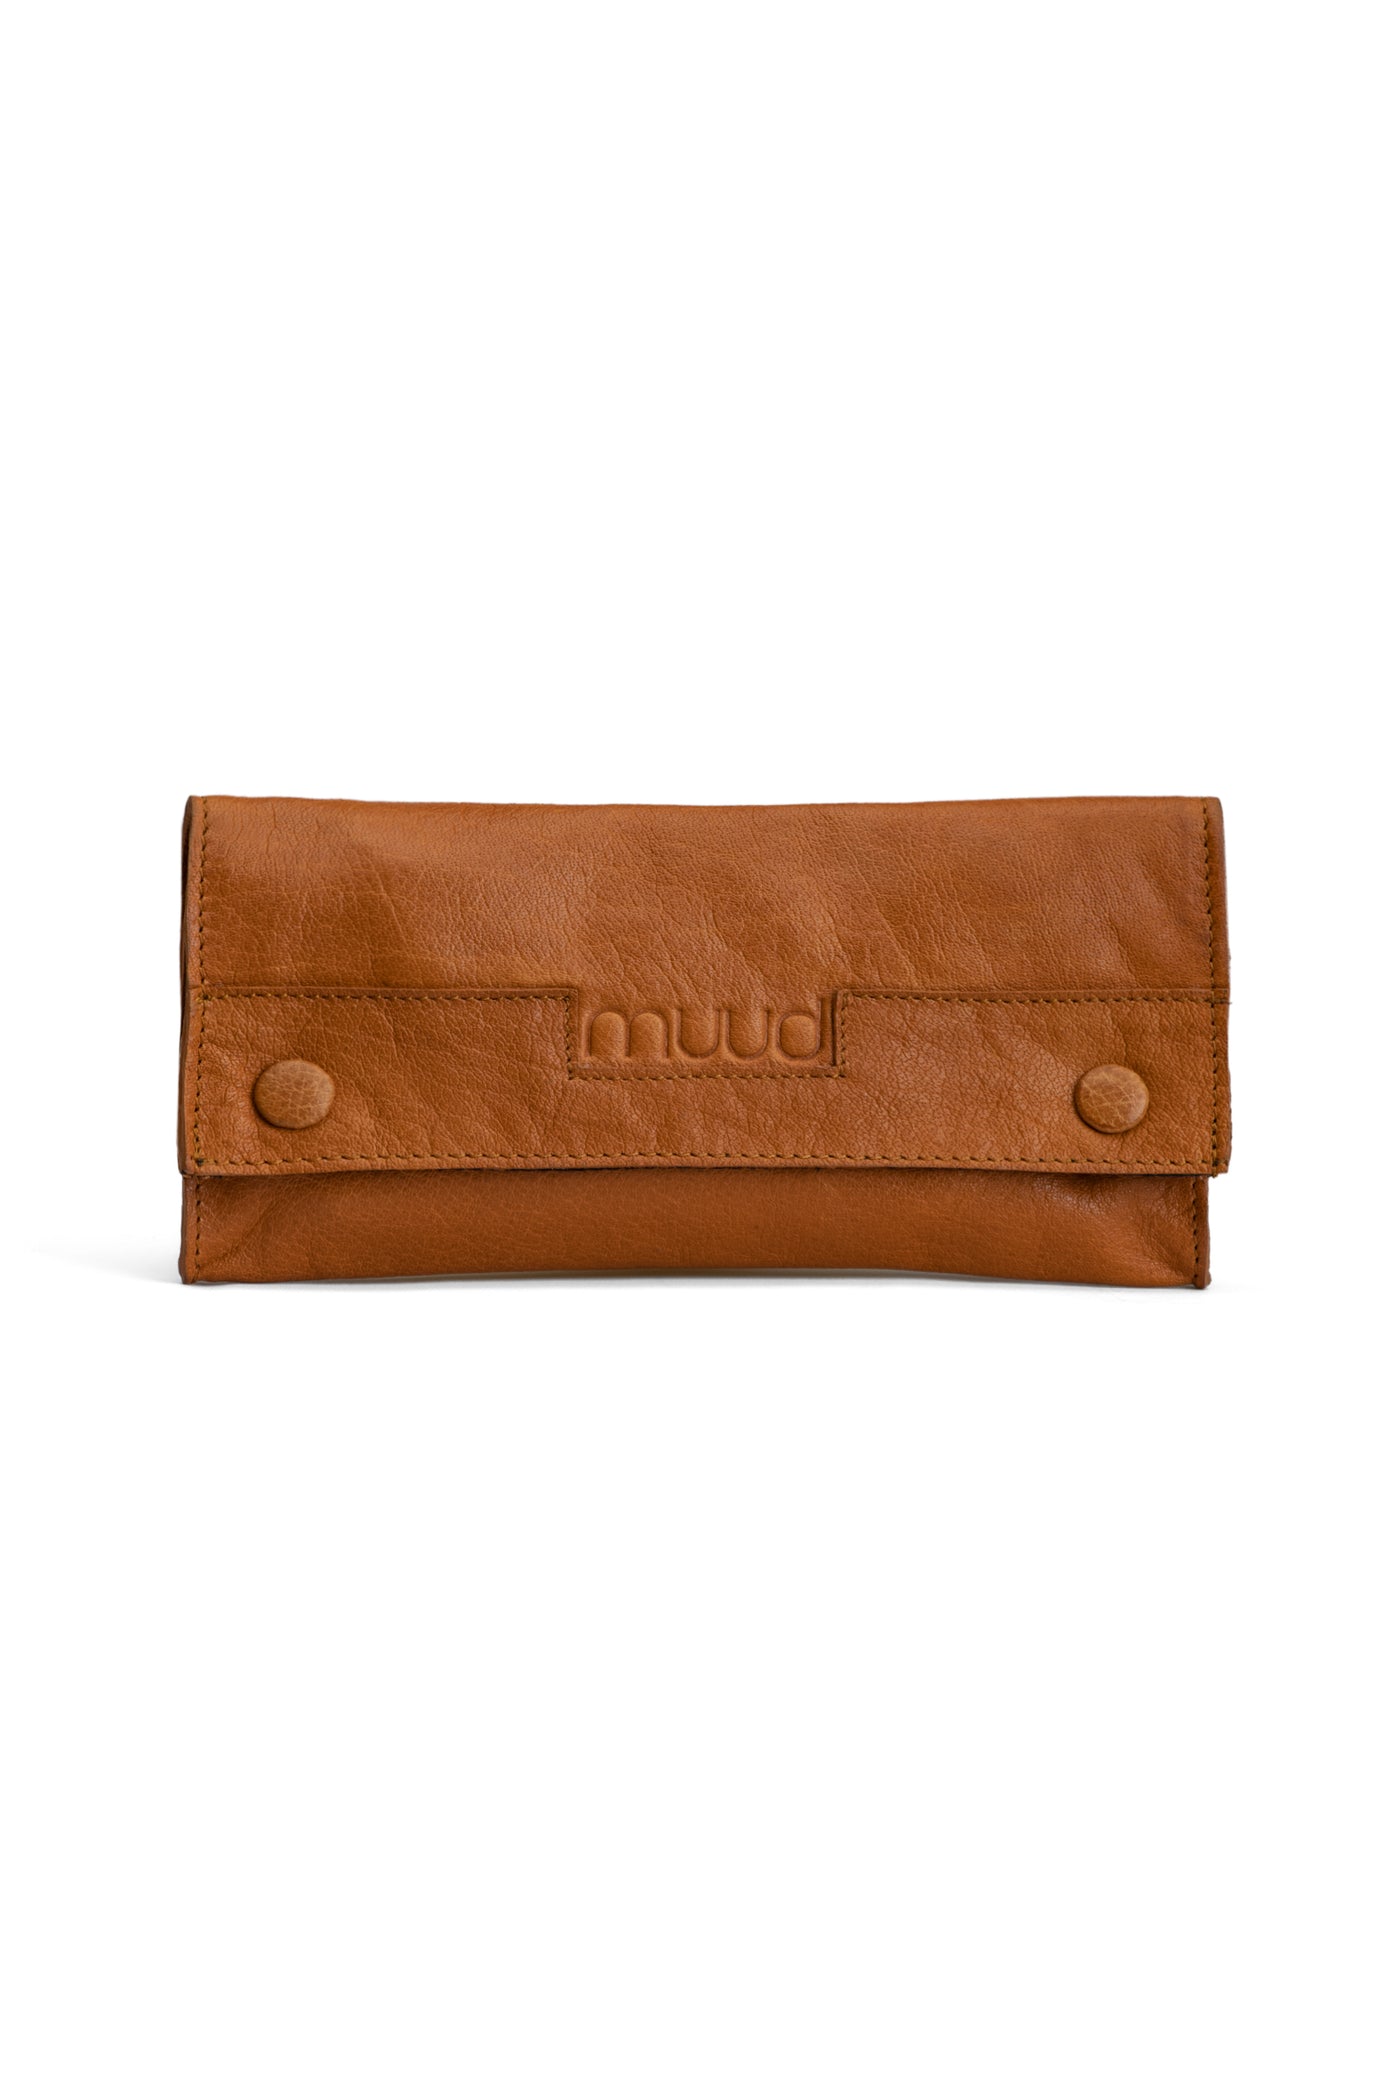 muud Liv Pouch knit Whisky